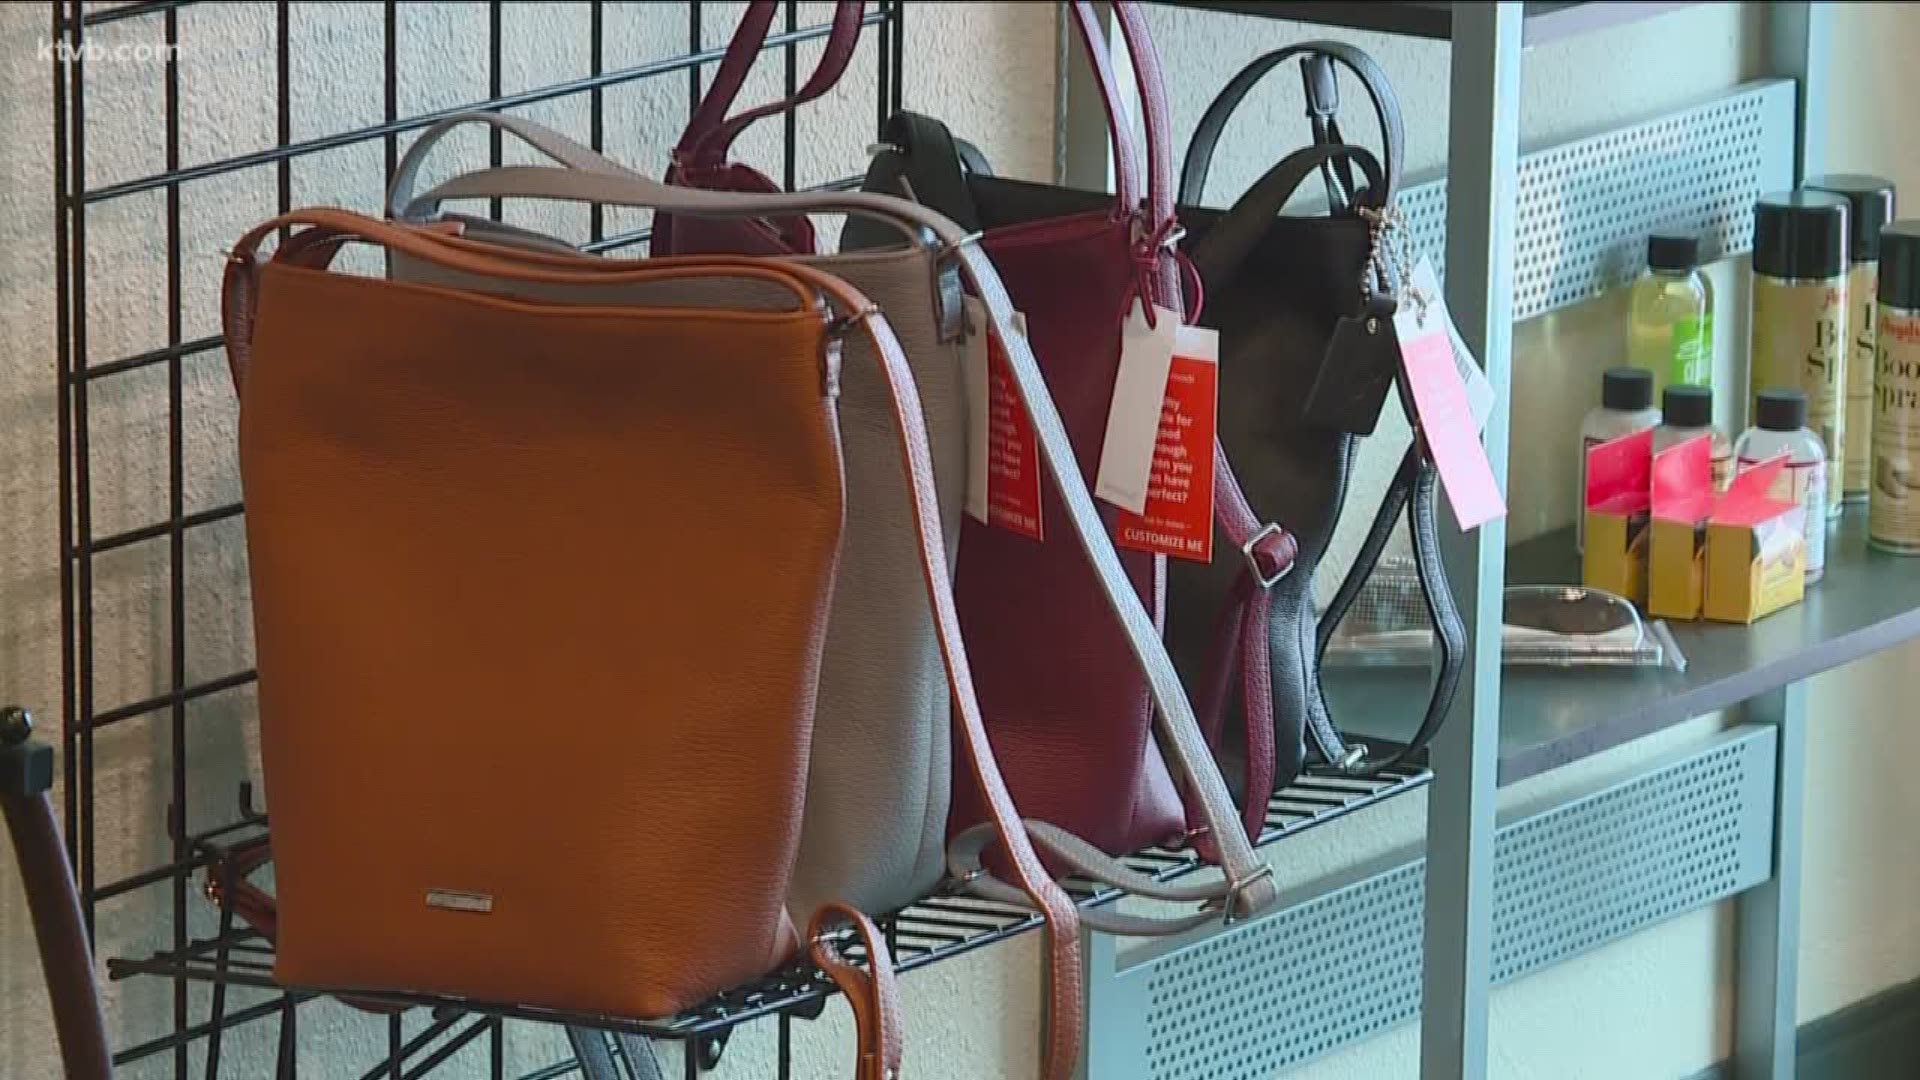 Dee Sarton goes to Garden City where they are making high-end handbags.